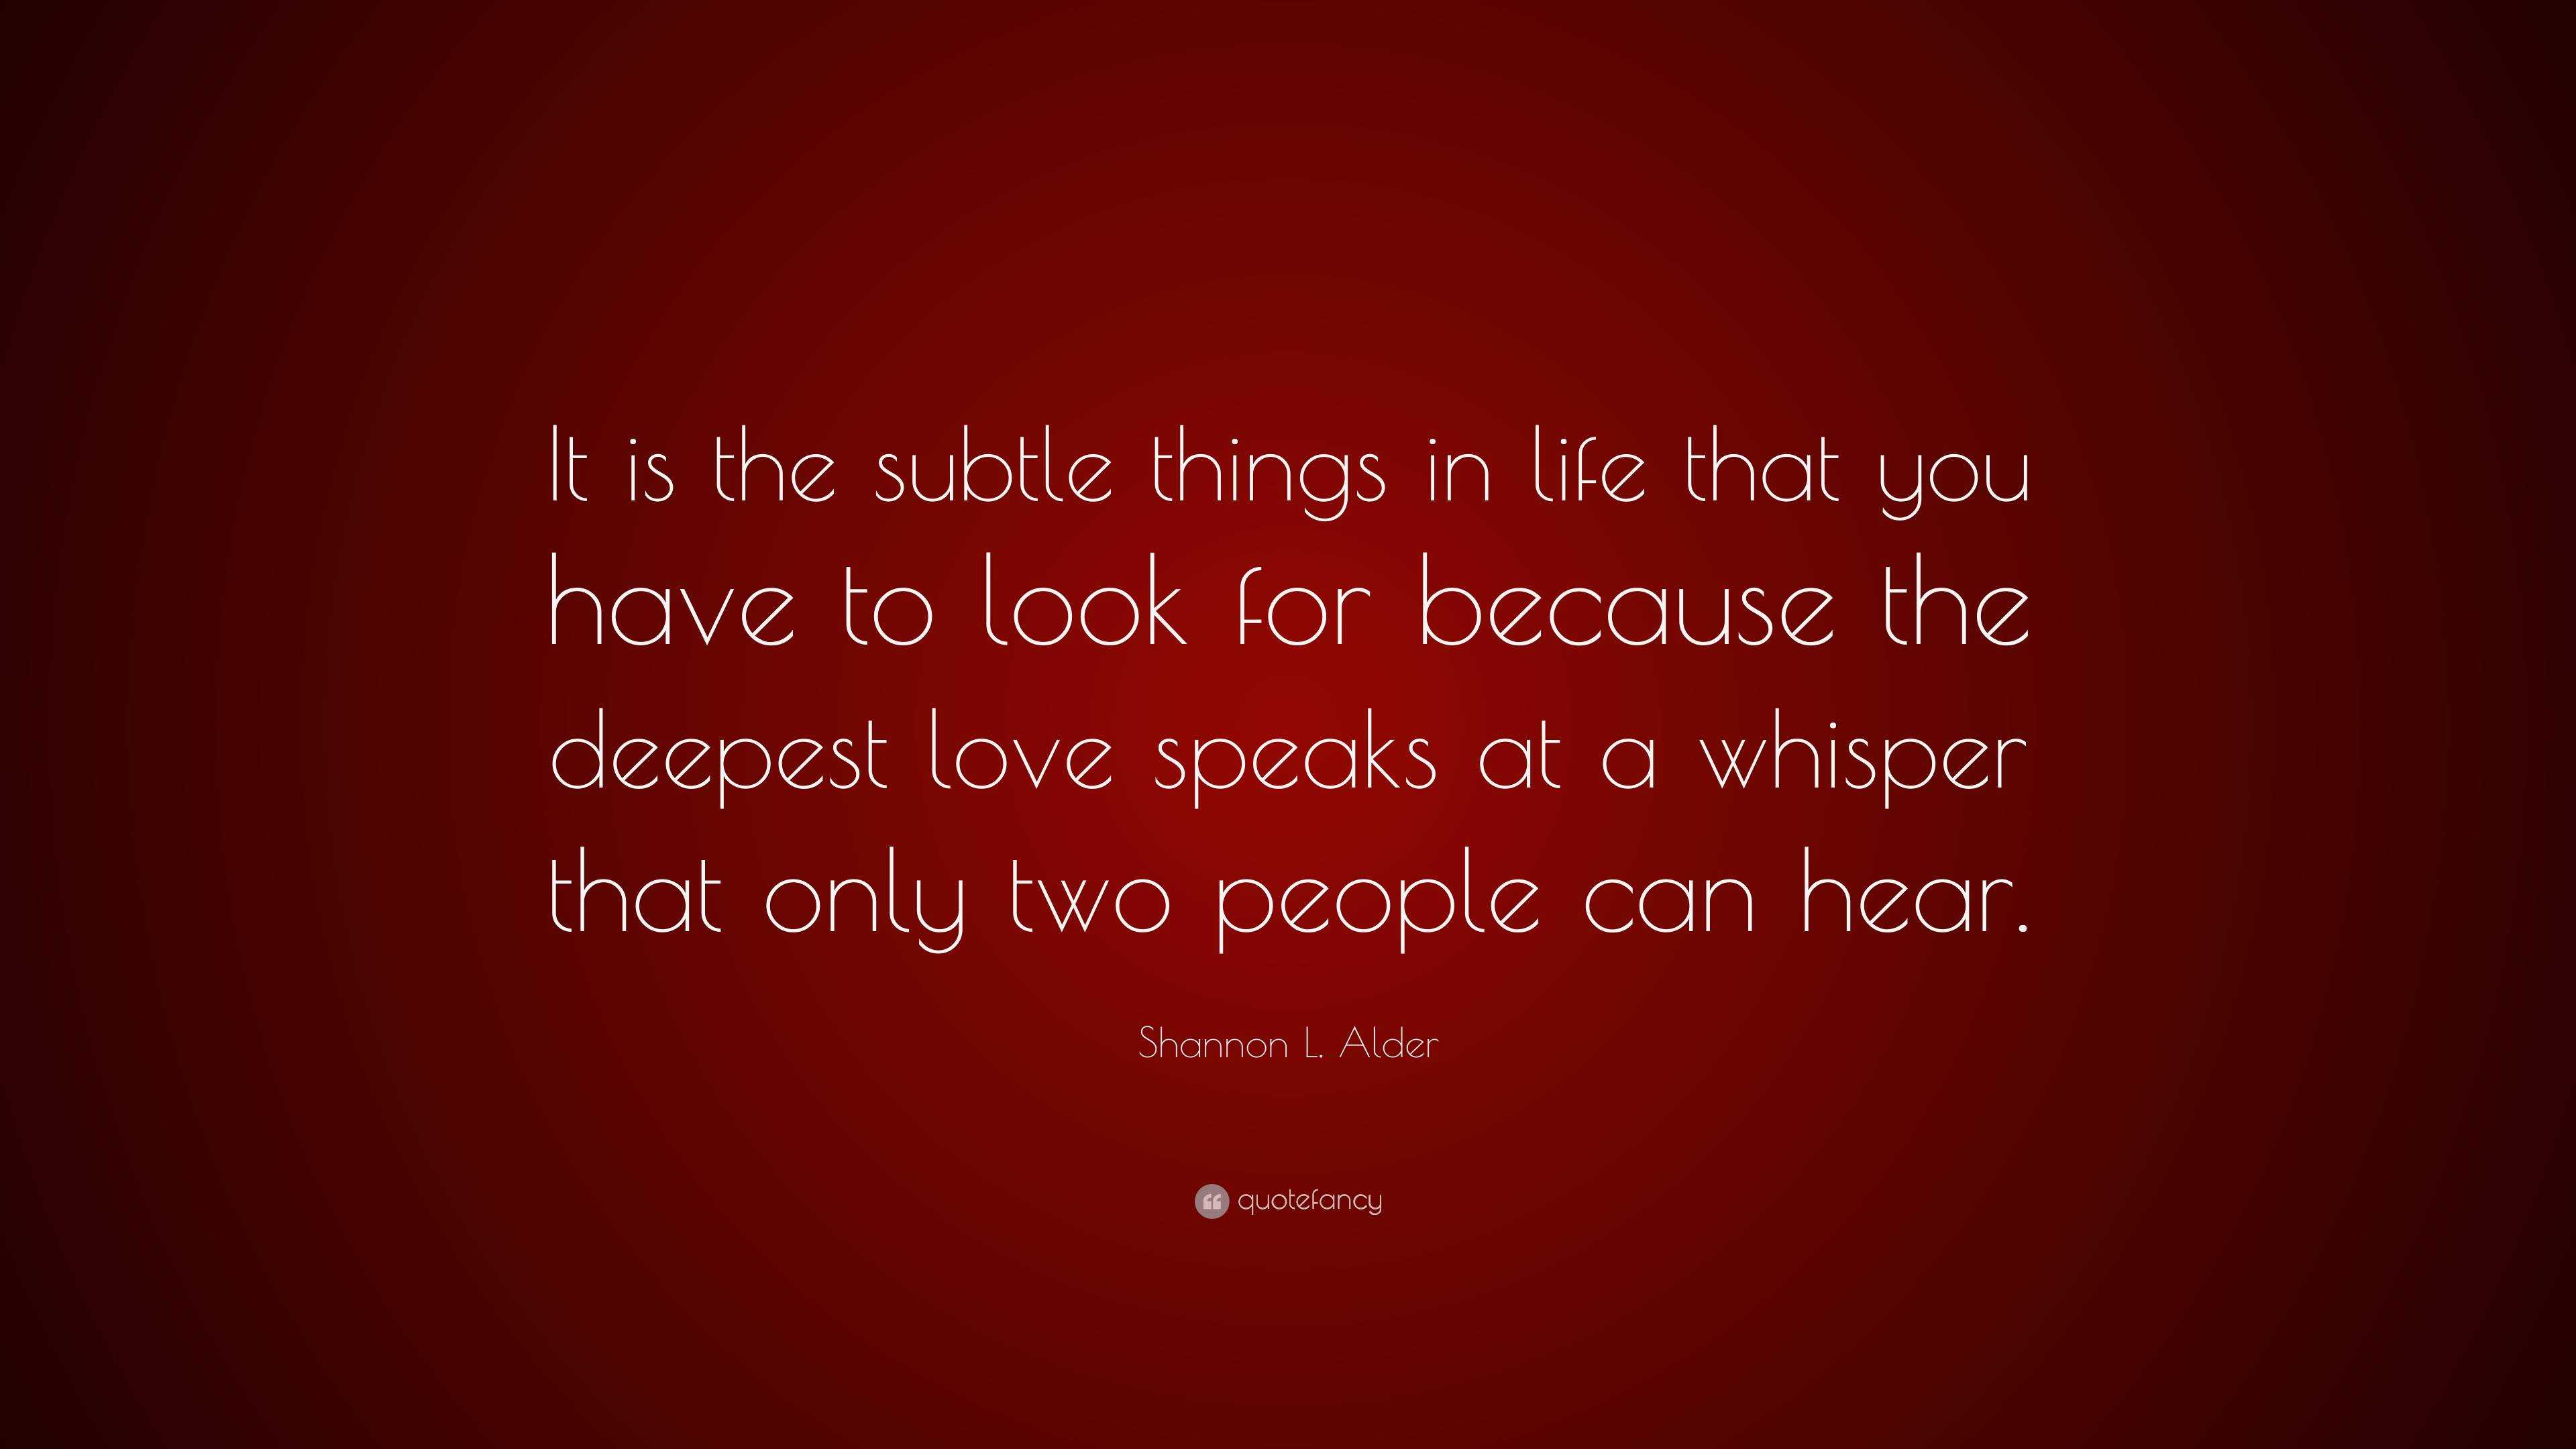 Shannon L. Alder Quote: “It is the subtle things in life that you have ...